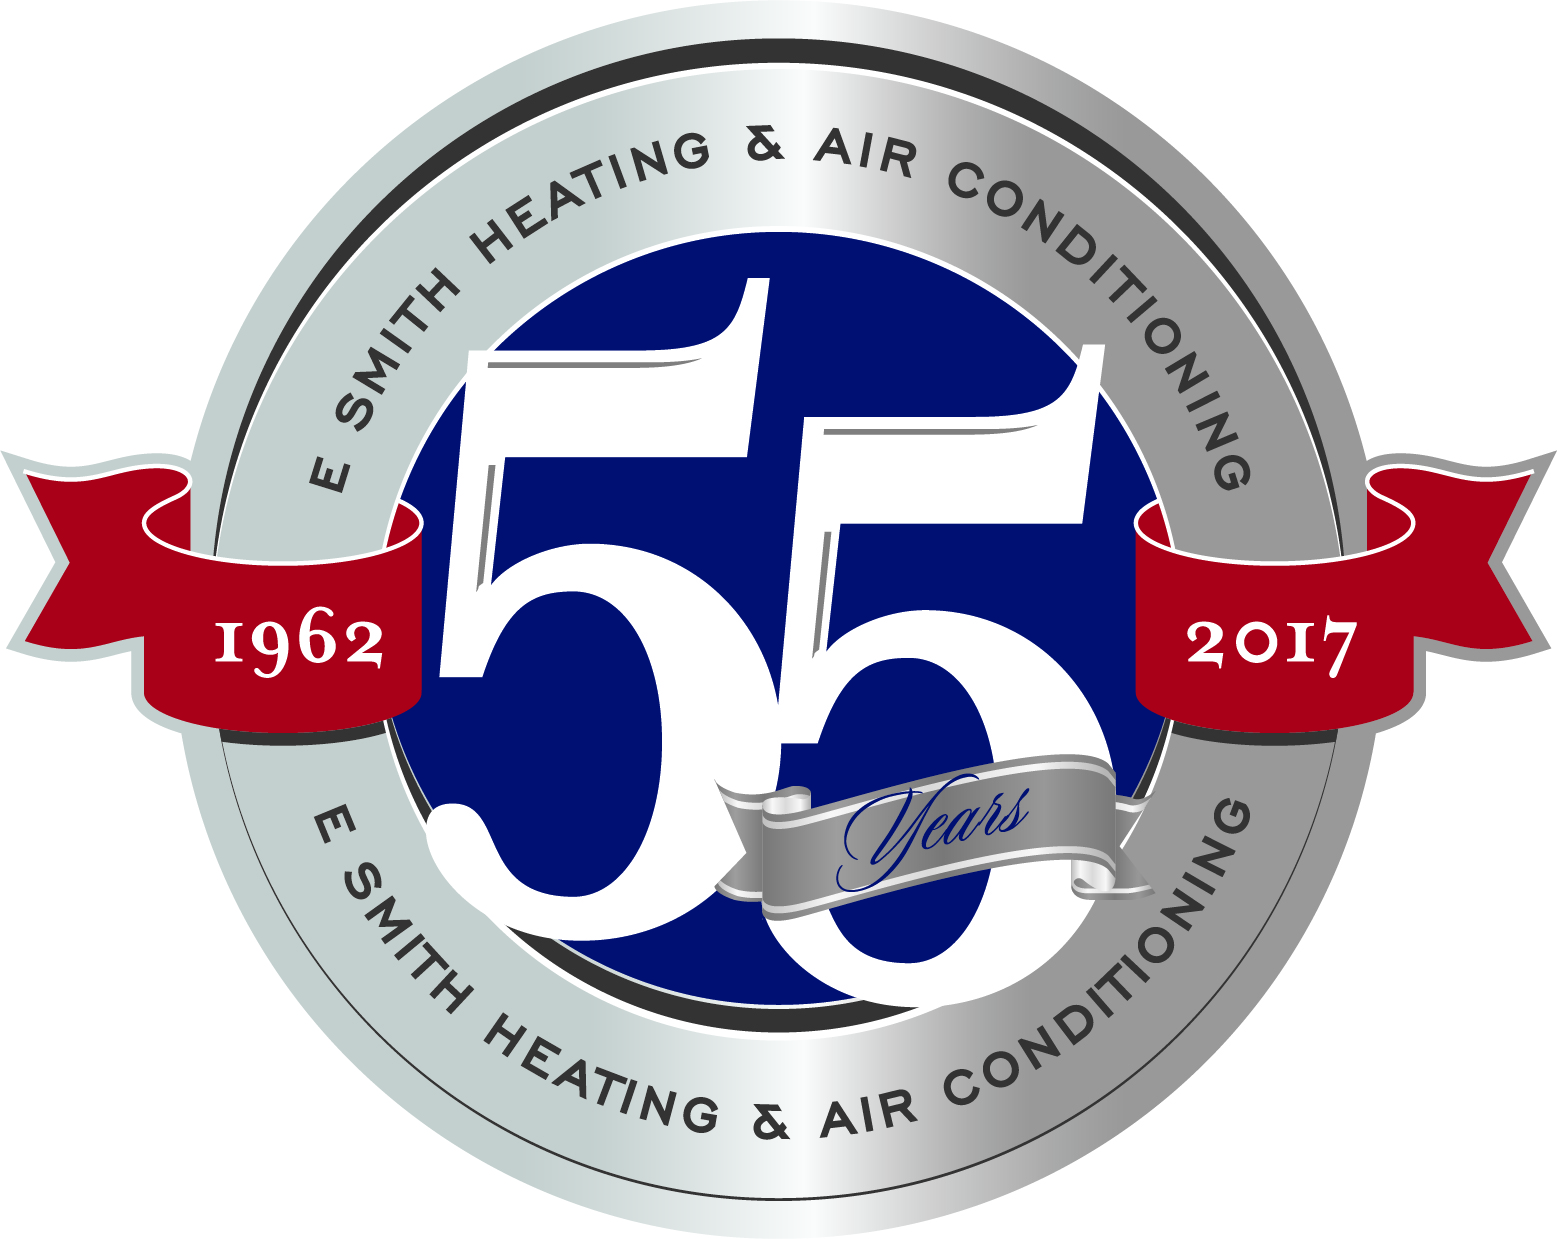 E. Smith Heating & Air Conditioning: Helping You Weather the Storms